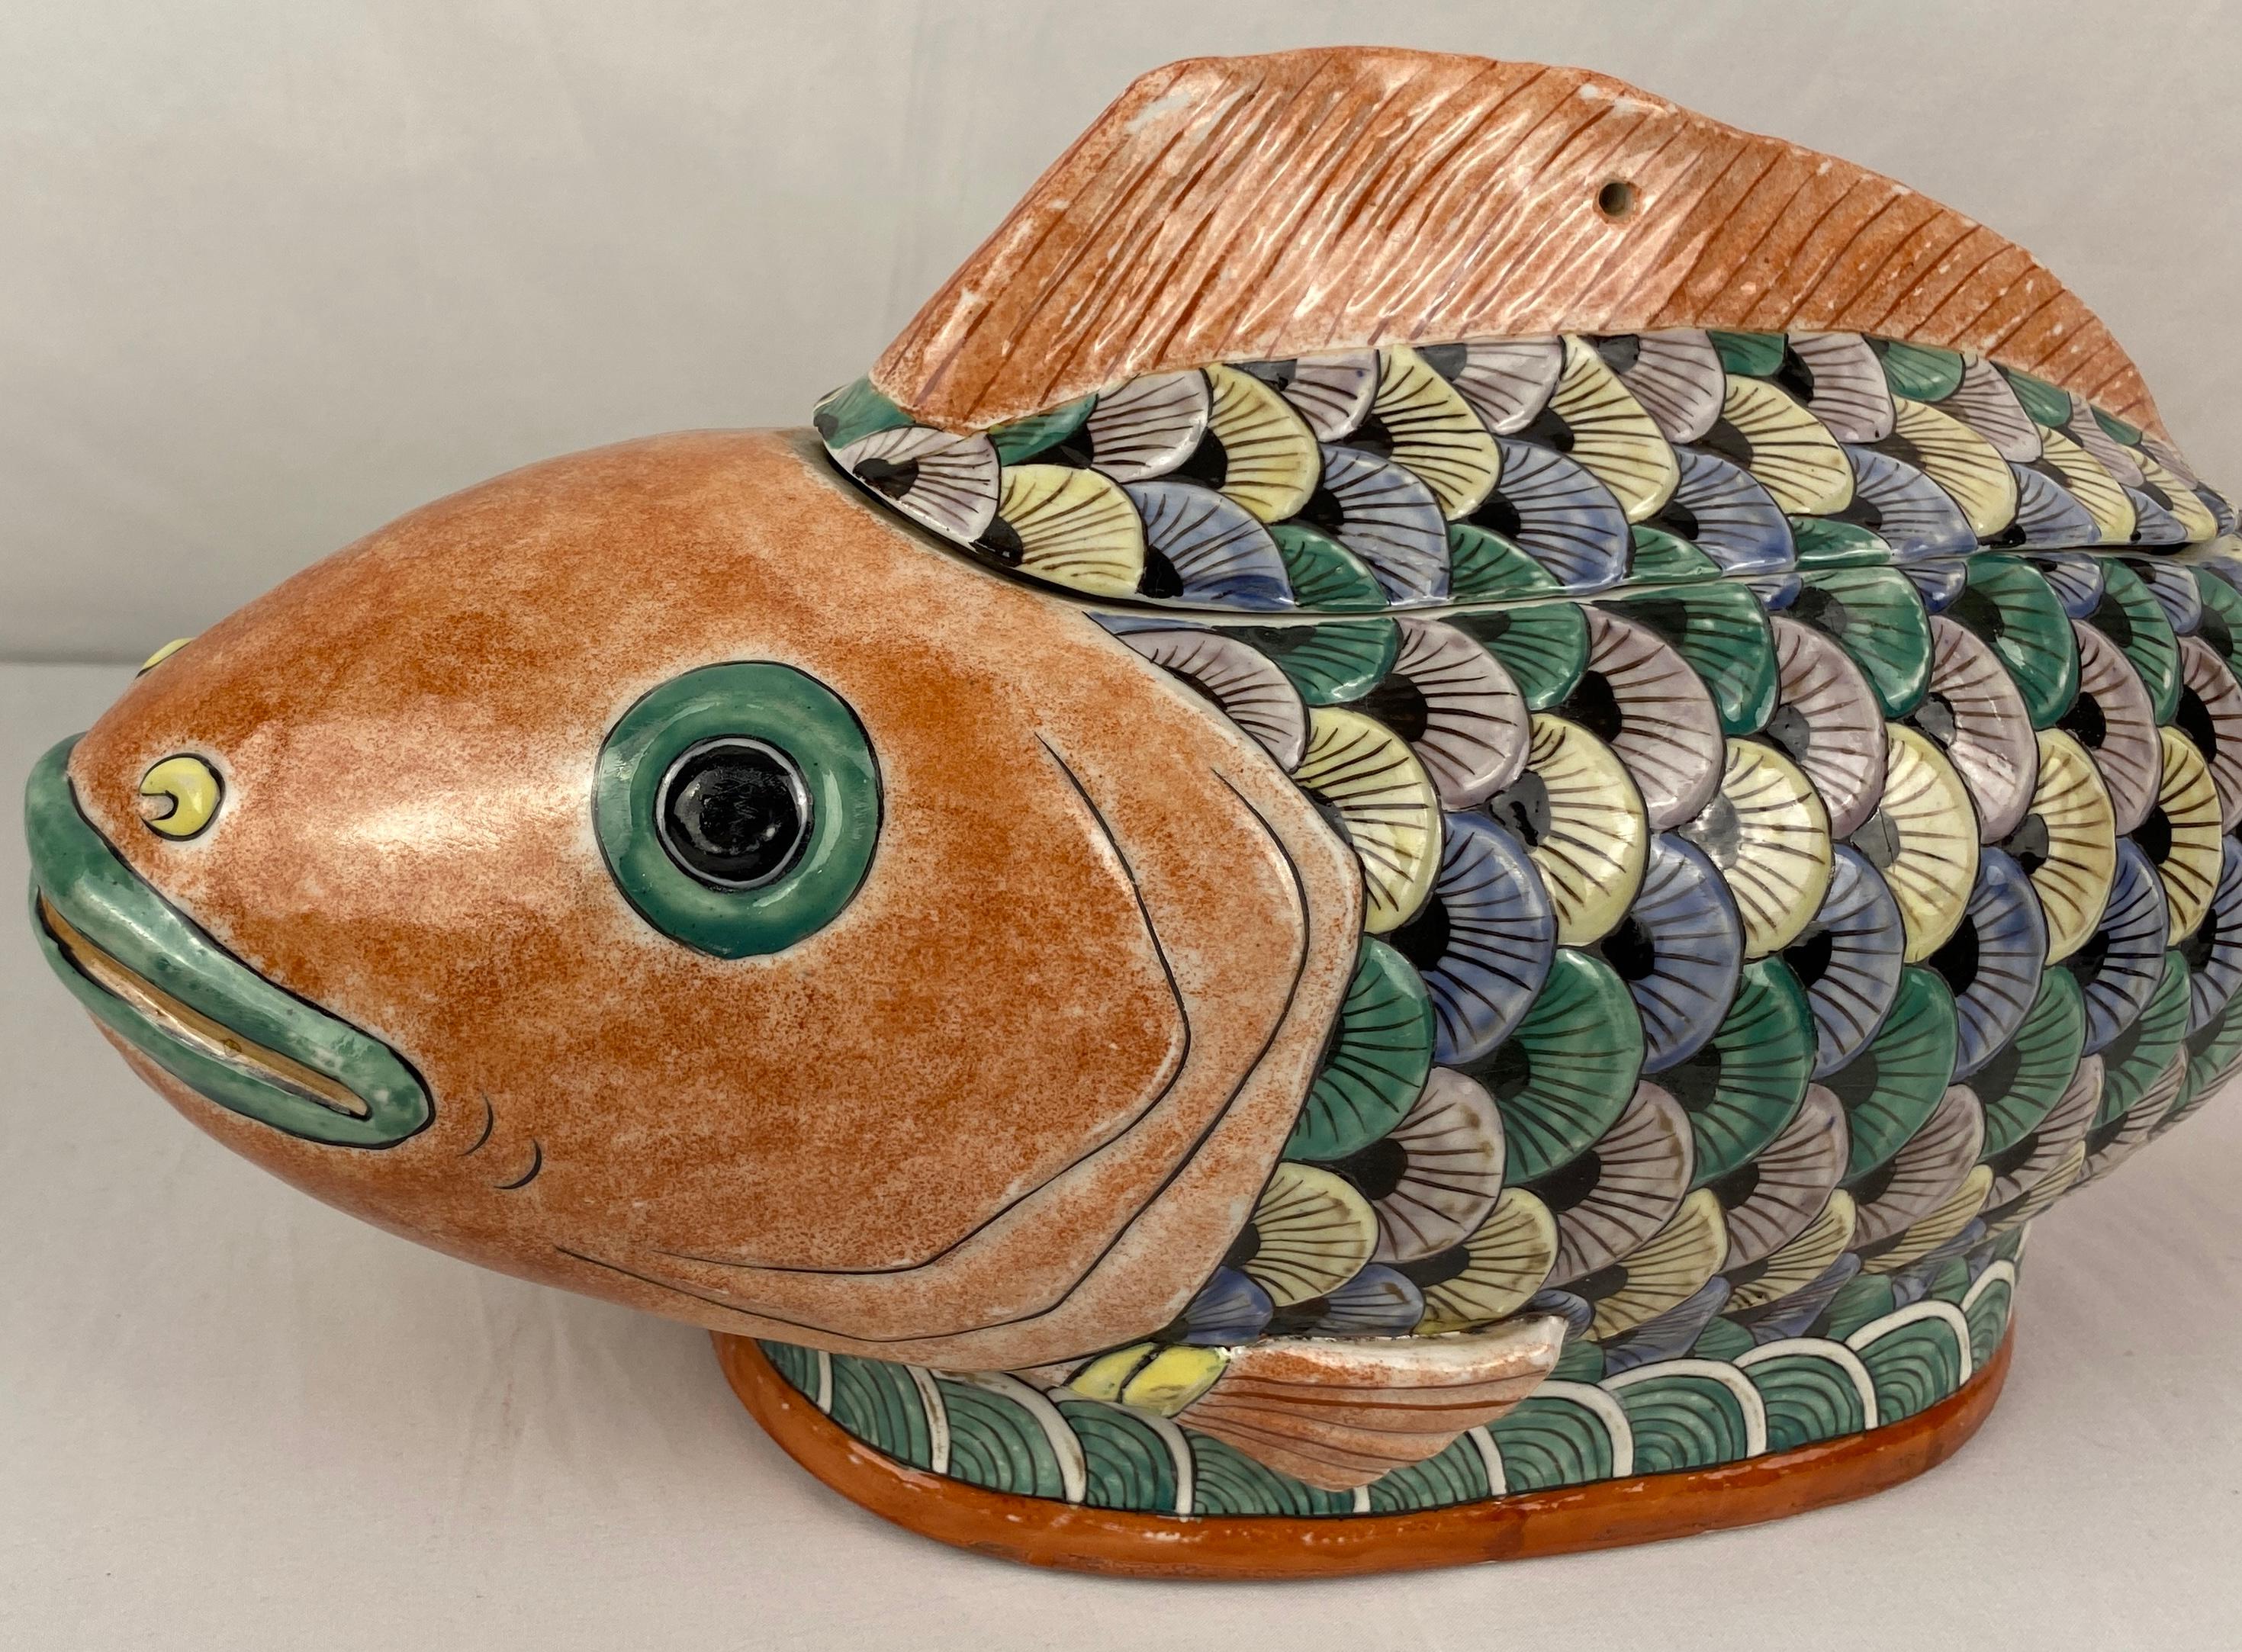 Mid-century ceramic fish, circa 1960s from our recent acquisitions, local travels- a nice catch.

A nice sized hand-crafted ceramic fish sculpture symbolic of prosperity, perseverance and good fortune. This fish displays beautiful colors and is in